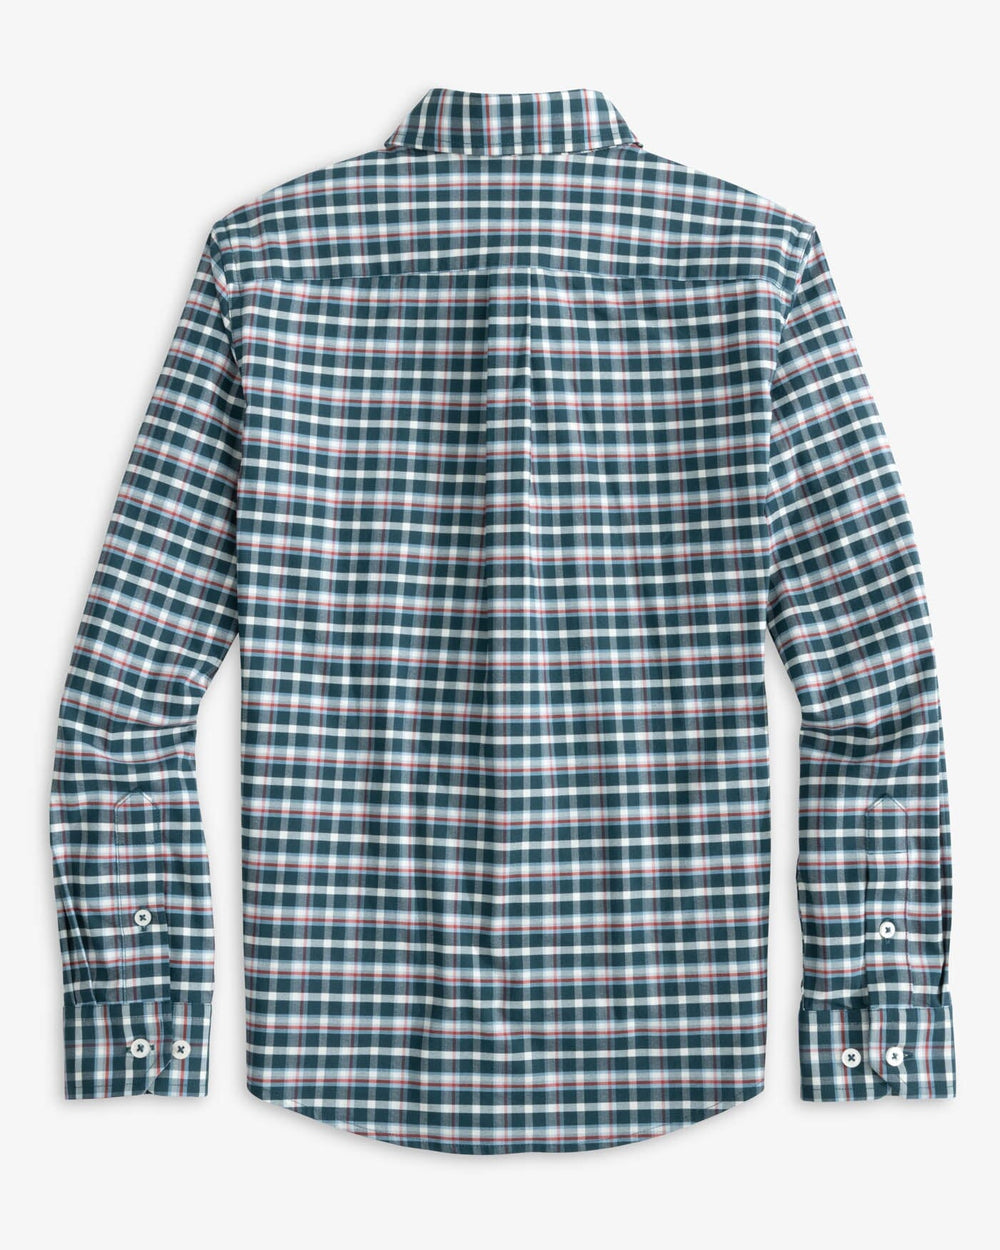 The back view of the Southern Tide Youth Coastal Passage Bowden Plaid Long Sleeve Sportshirt by Southern Tide - Georgian Bay Green